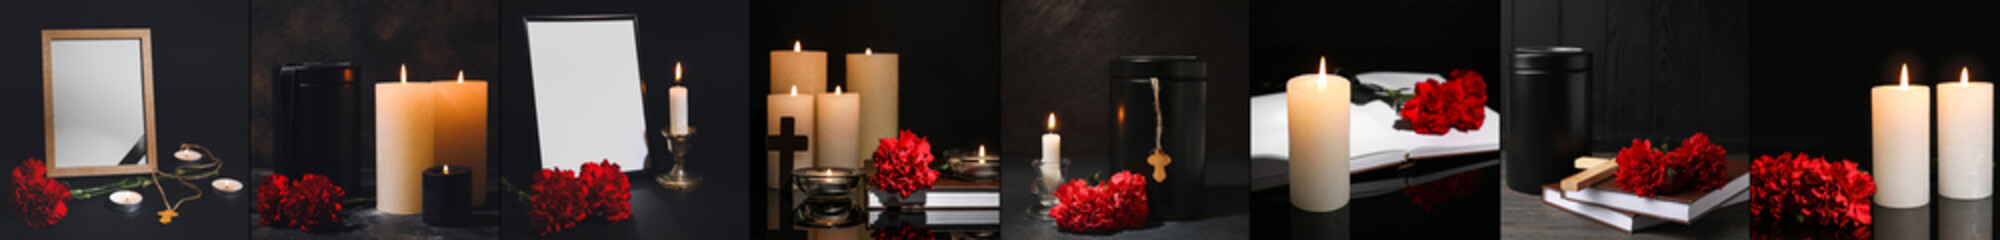 Collage of burning candles with mortuary urns, red carnation flowers, photo frames, books and crosses on dark background